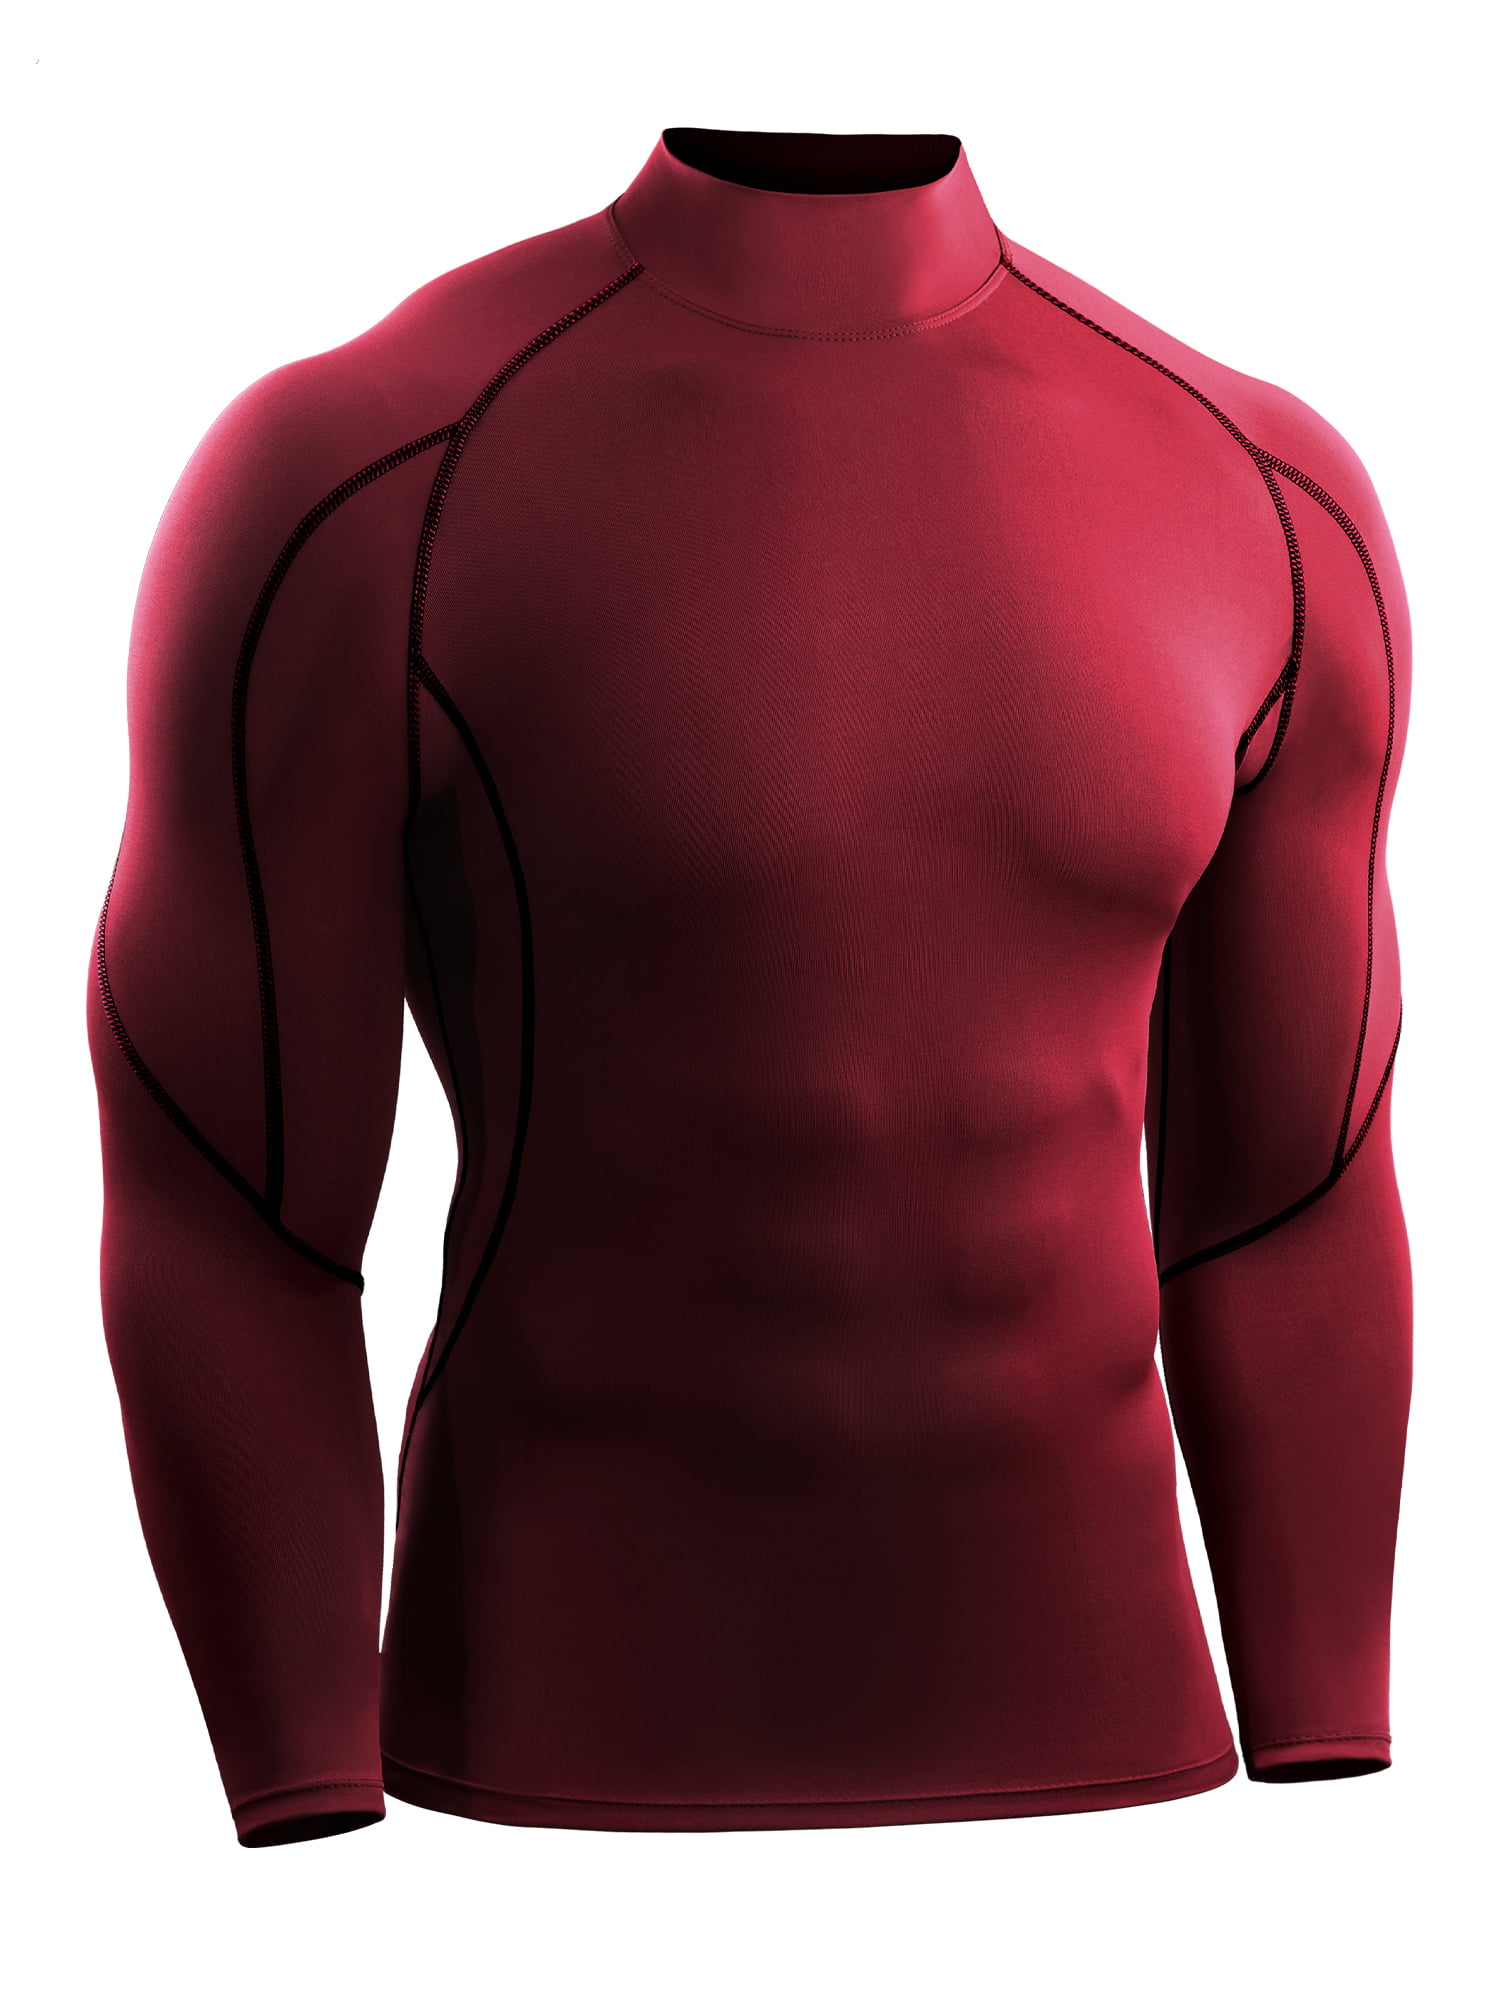 Men's Compression Shirt Mock Neck Gym Top Dri-fit Long Sleeves Base Layer Tight 